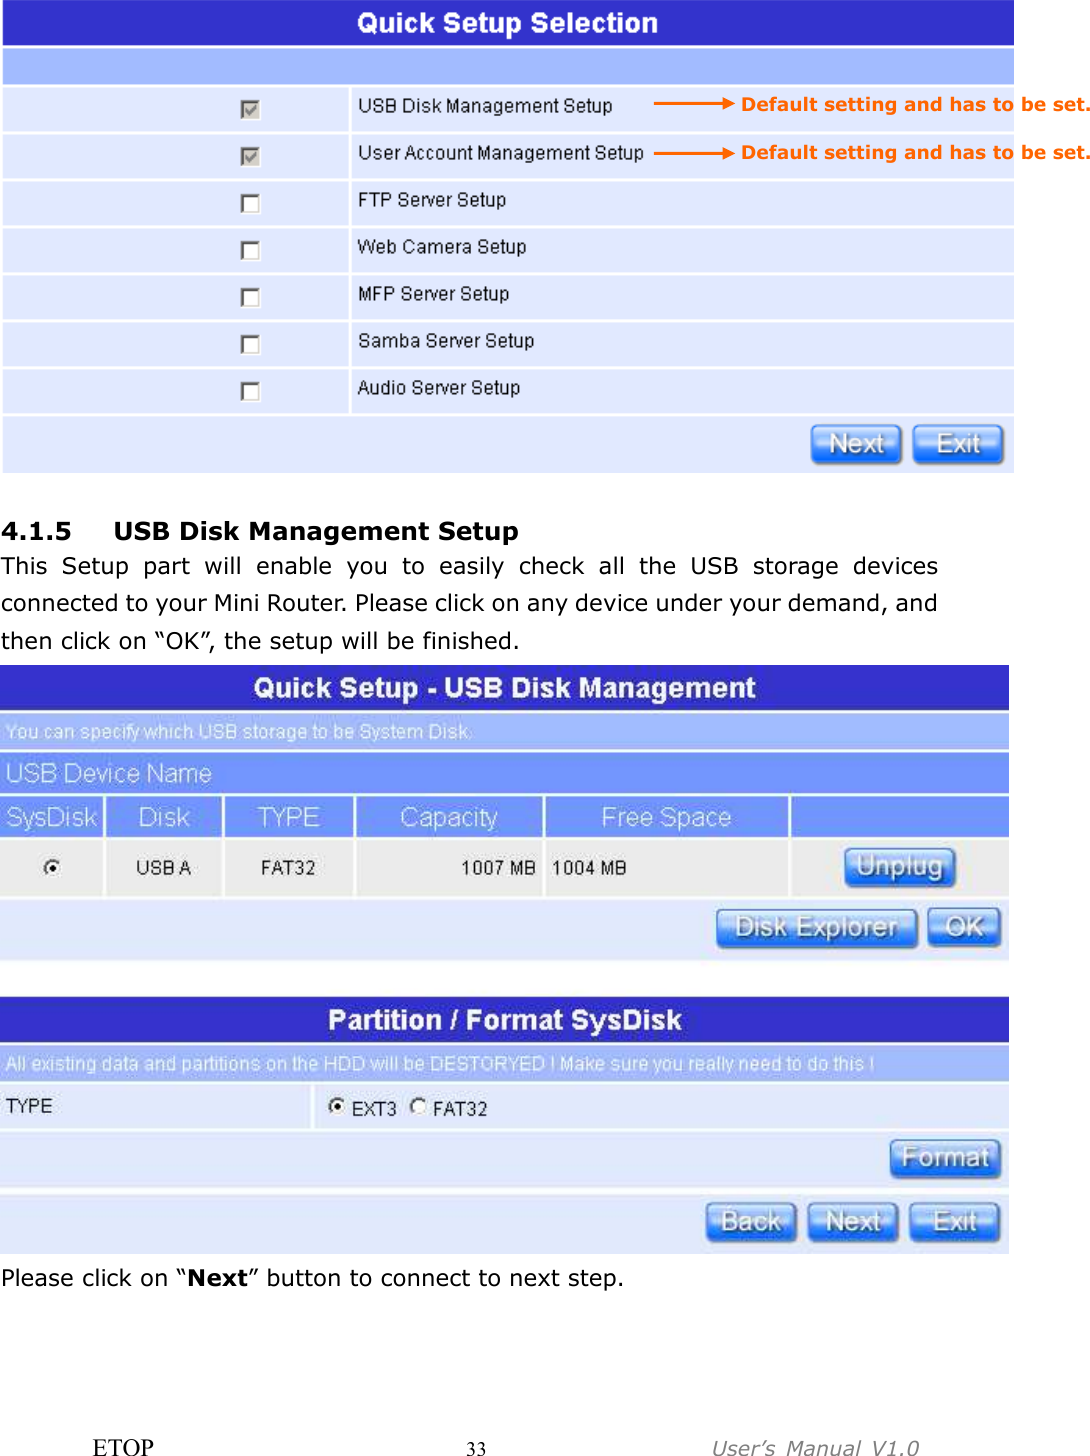 ETOP                         33                  User’s  Manual  V1.0    4.1.5 USB Disk Management Setup This  Setup  part  will  enable  you  to  easily  check  all  the  USB  storage  devices connected to your Mini Router. Please click on any device under your demand, and then click on “OK”, the setup will be finished.  Please click on “Next” button to connect to next step. Default setting and has to be set. Default setting and has to be set. 